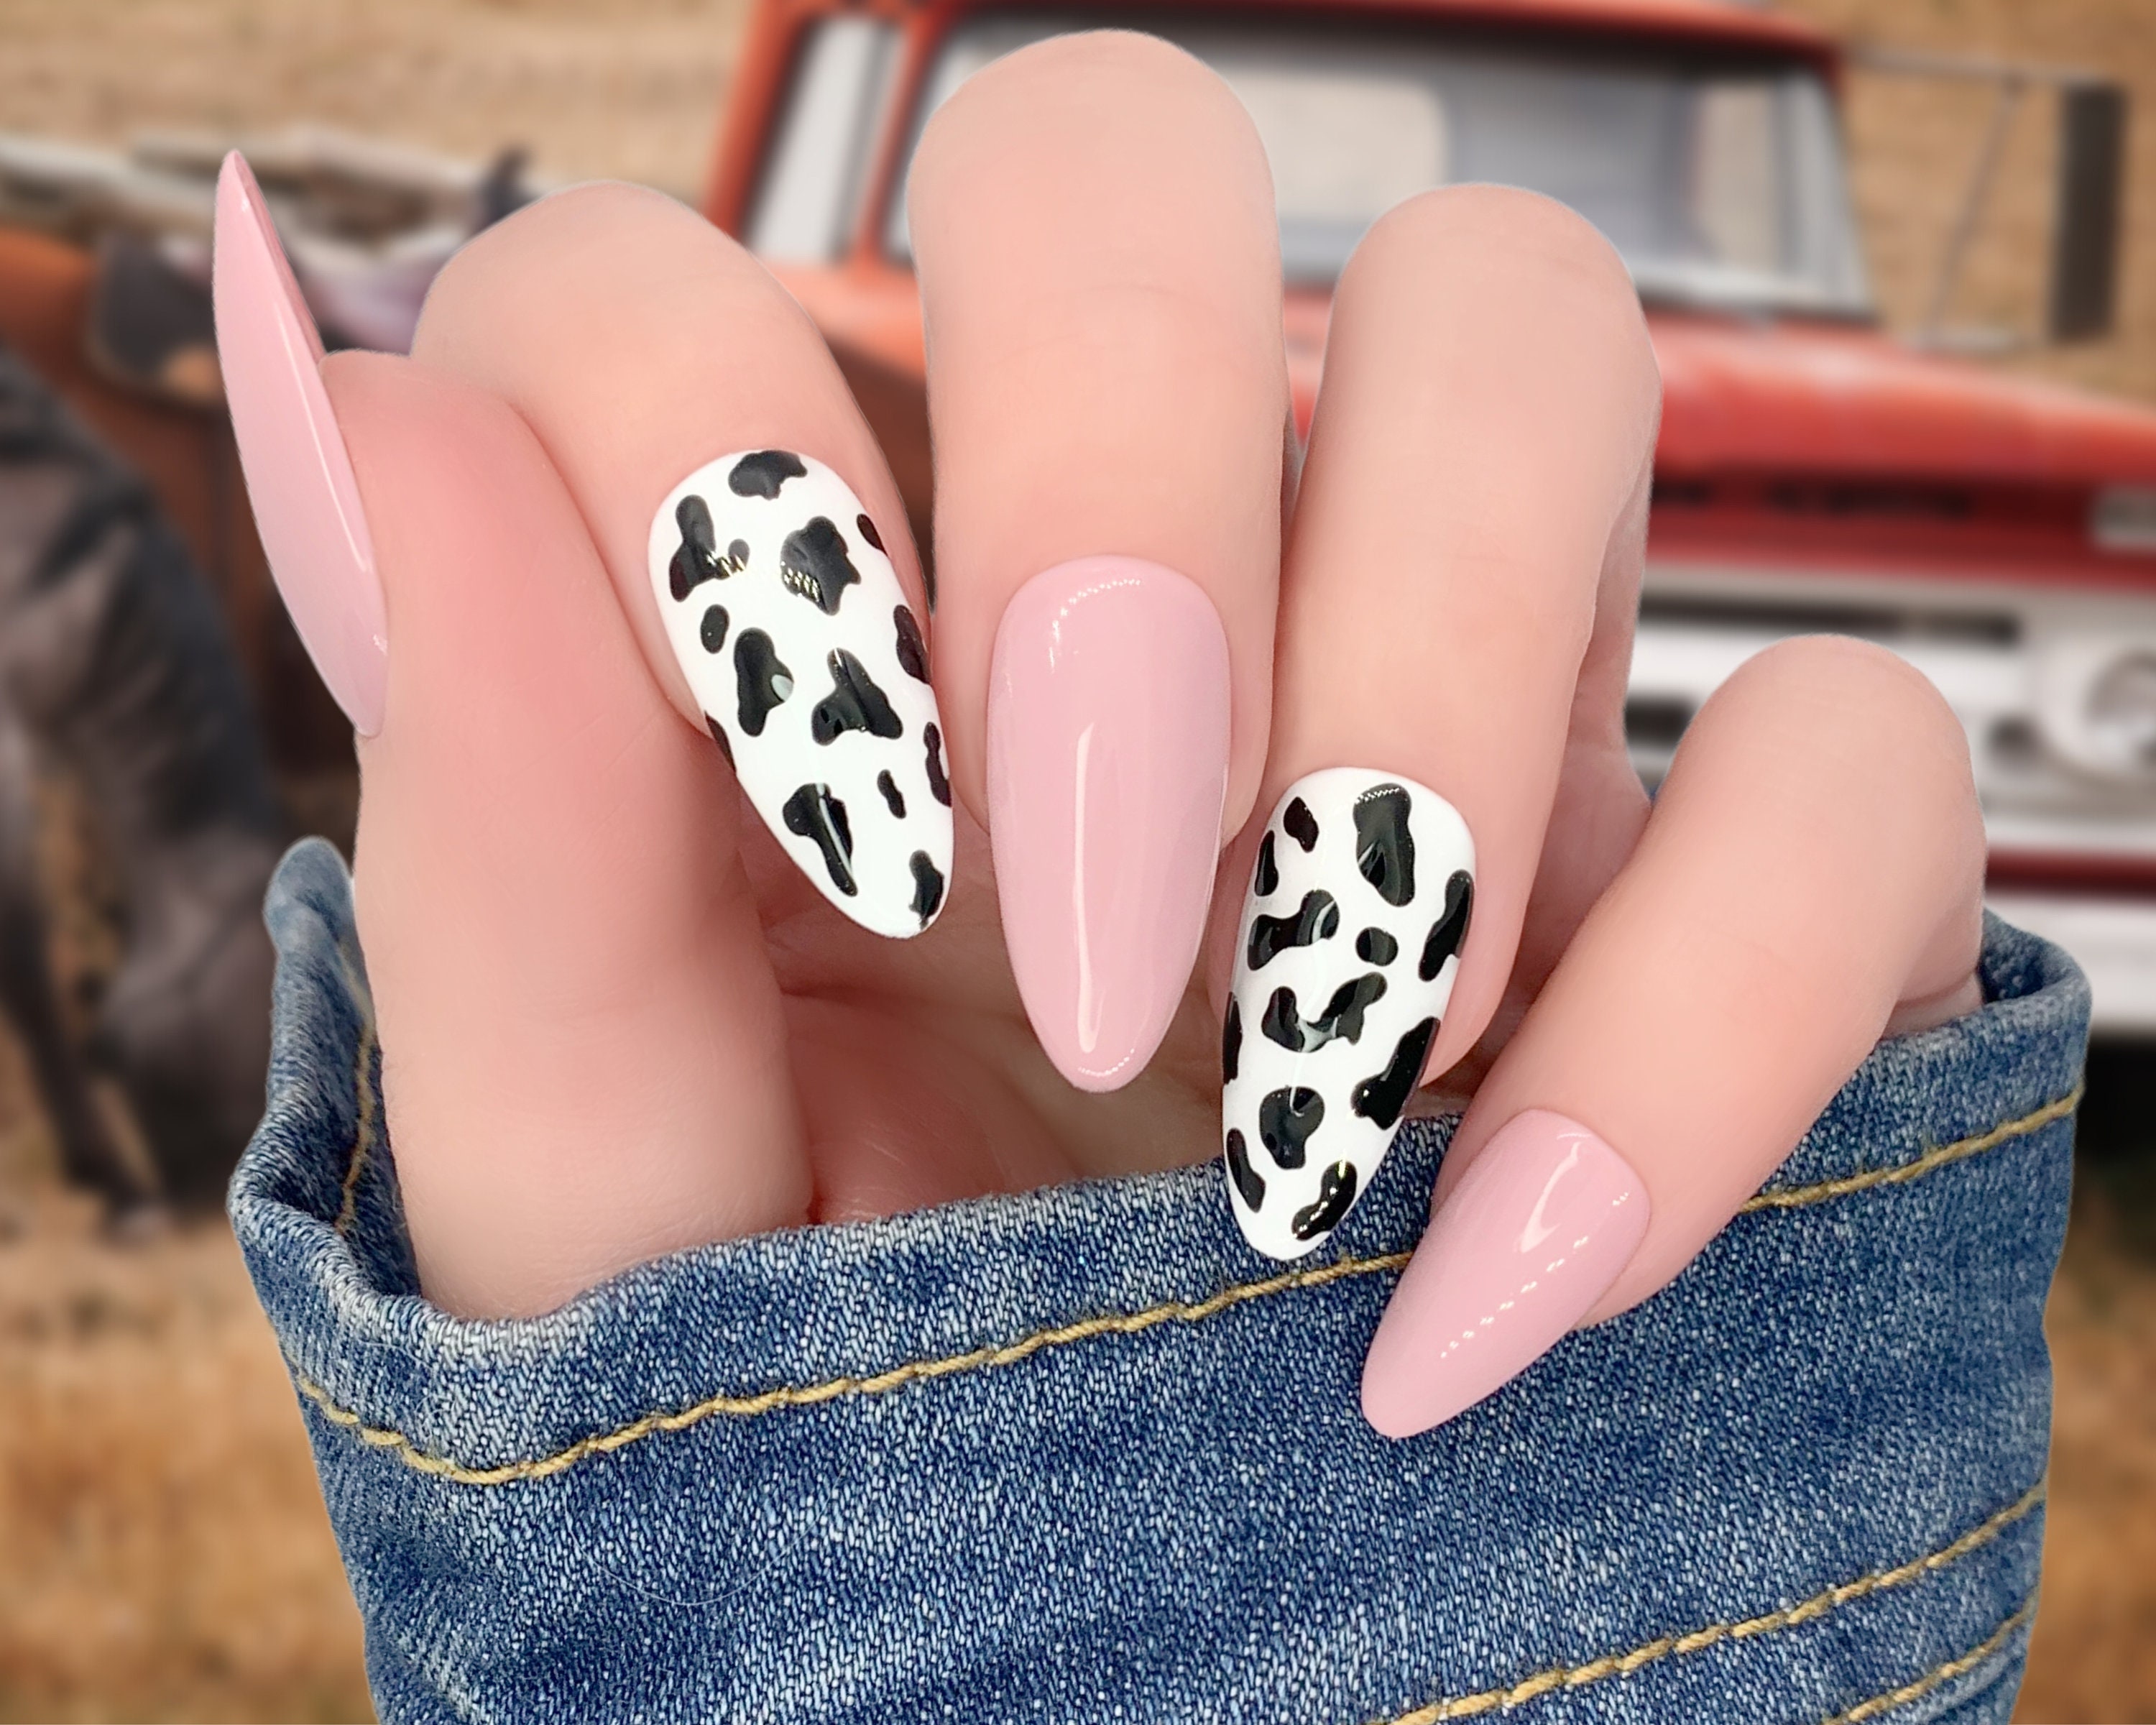 Lacquered Lawyer  Nail Art Blog: LV Love